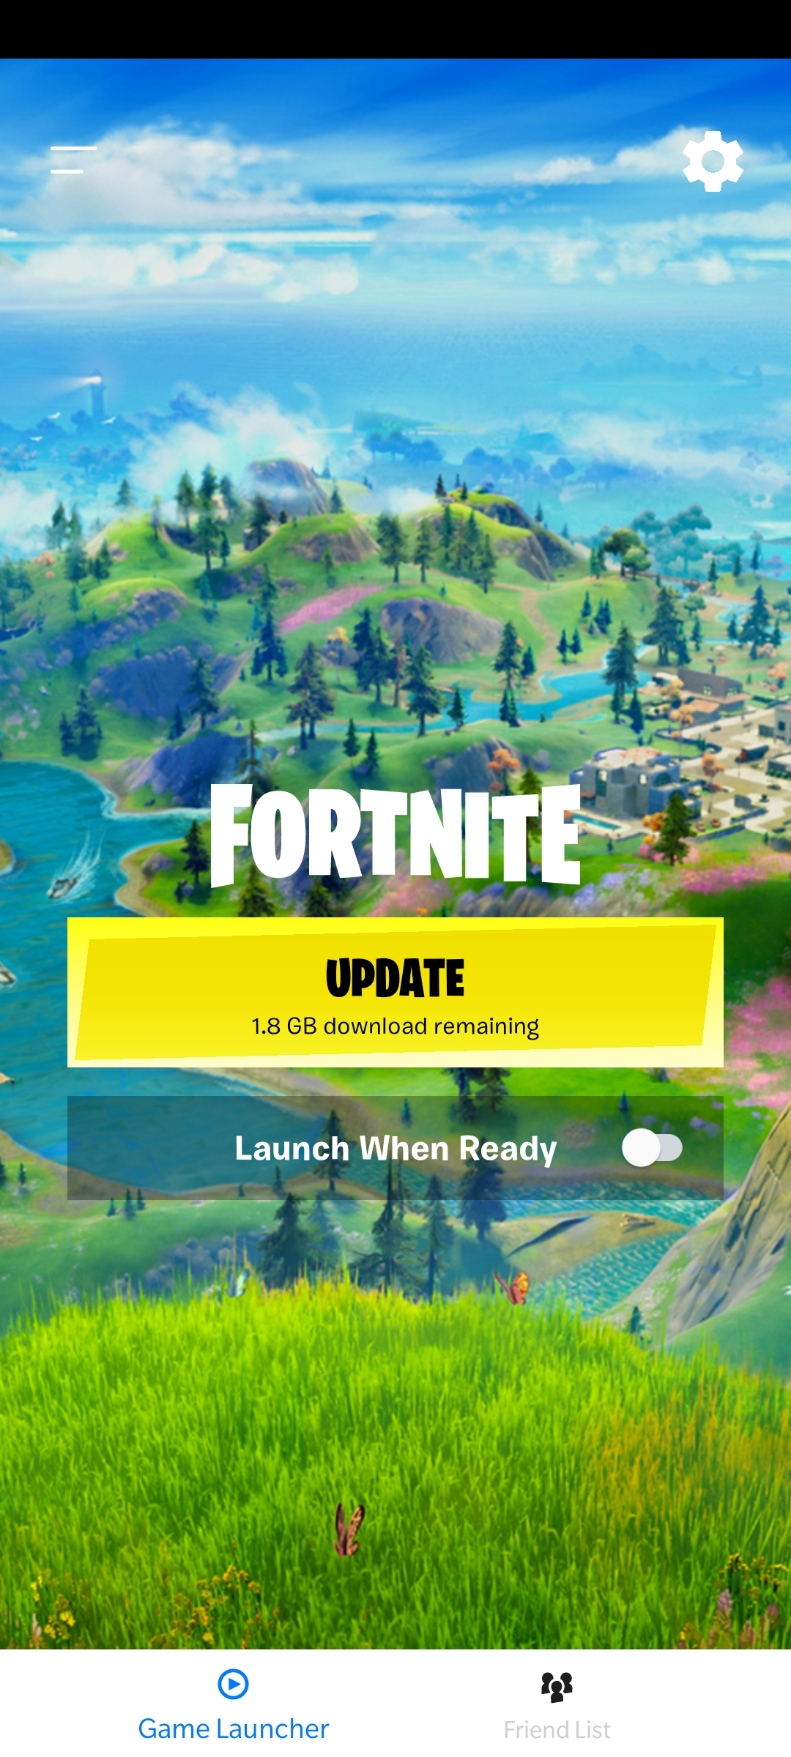 EPIC Games Launcher Mobile: How To Download And Play Fortnite Mobile?